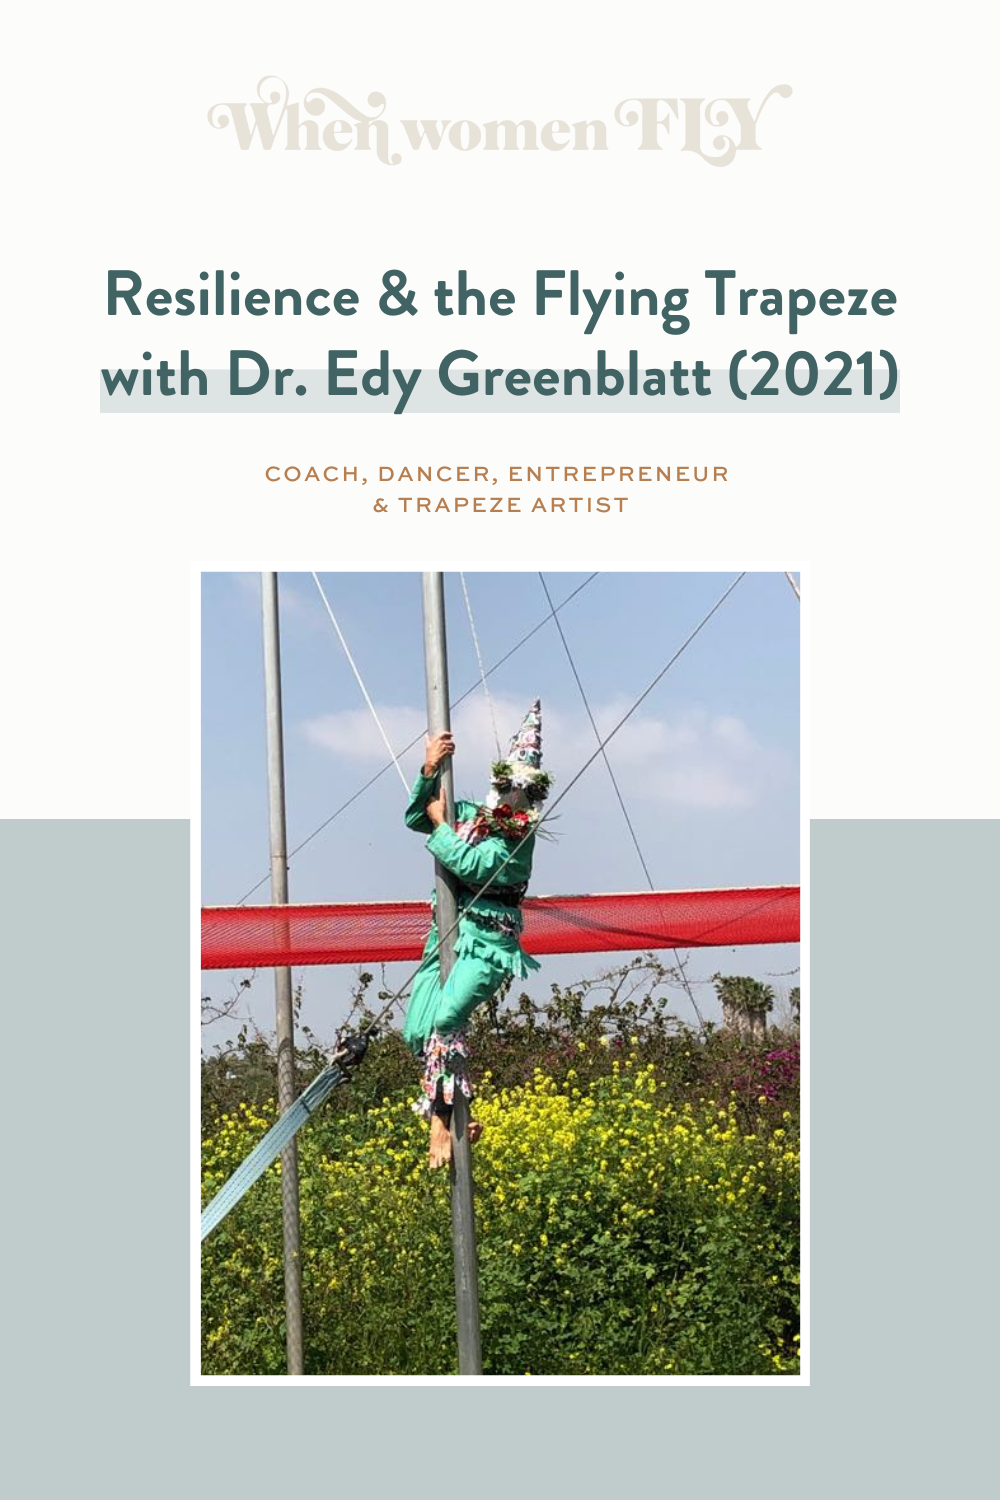 Resilience and the Flying Trapeze with Dr. Edy Greenblatt - Entrepreneur, Coach, and Dancer (2021)